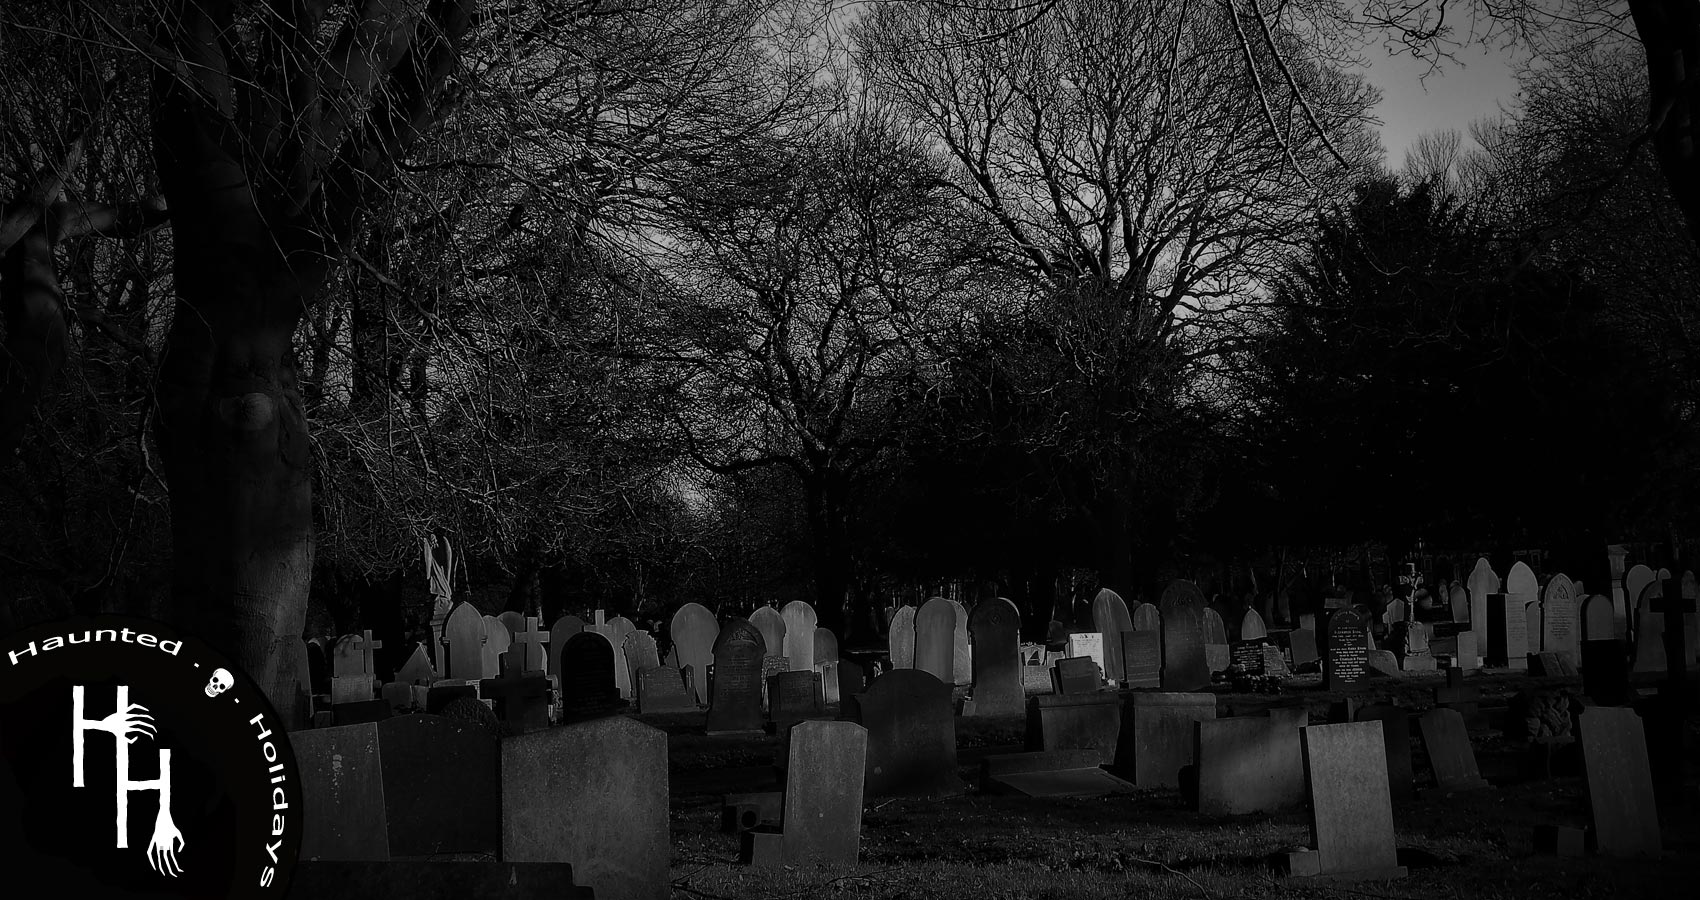 A Graveyard Walk, a poem by Kim M. Russell at Spillwords.com